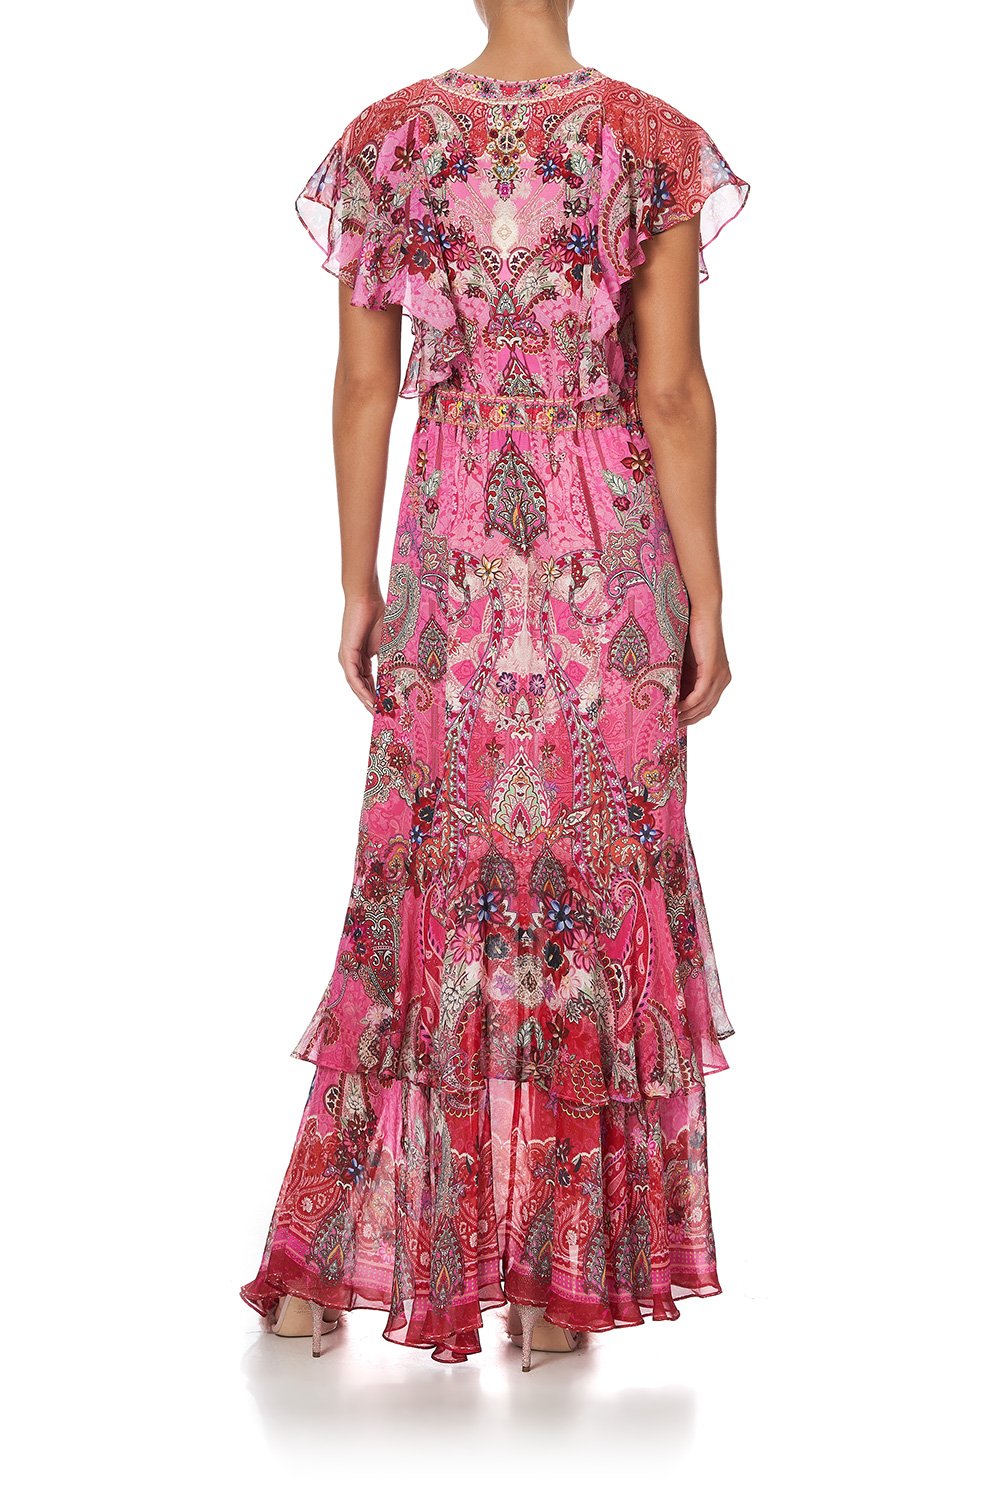 TIE FRONT MAXI WITH CENTRE FRONT SPLIT PALISADES PAISLEY